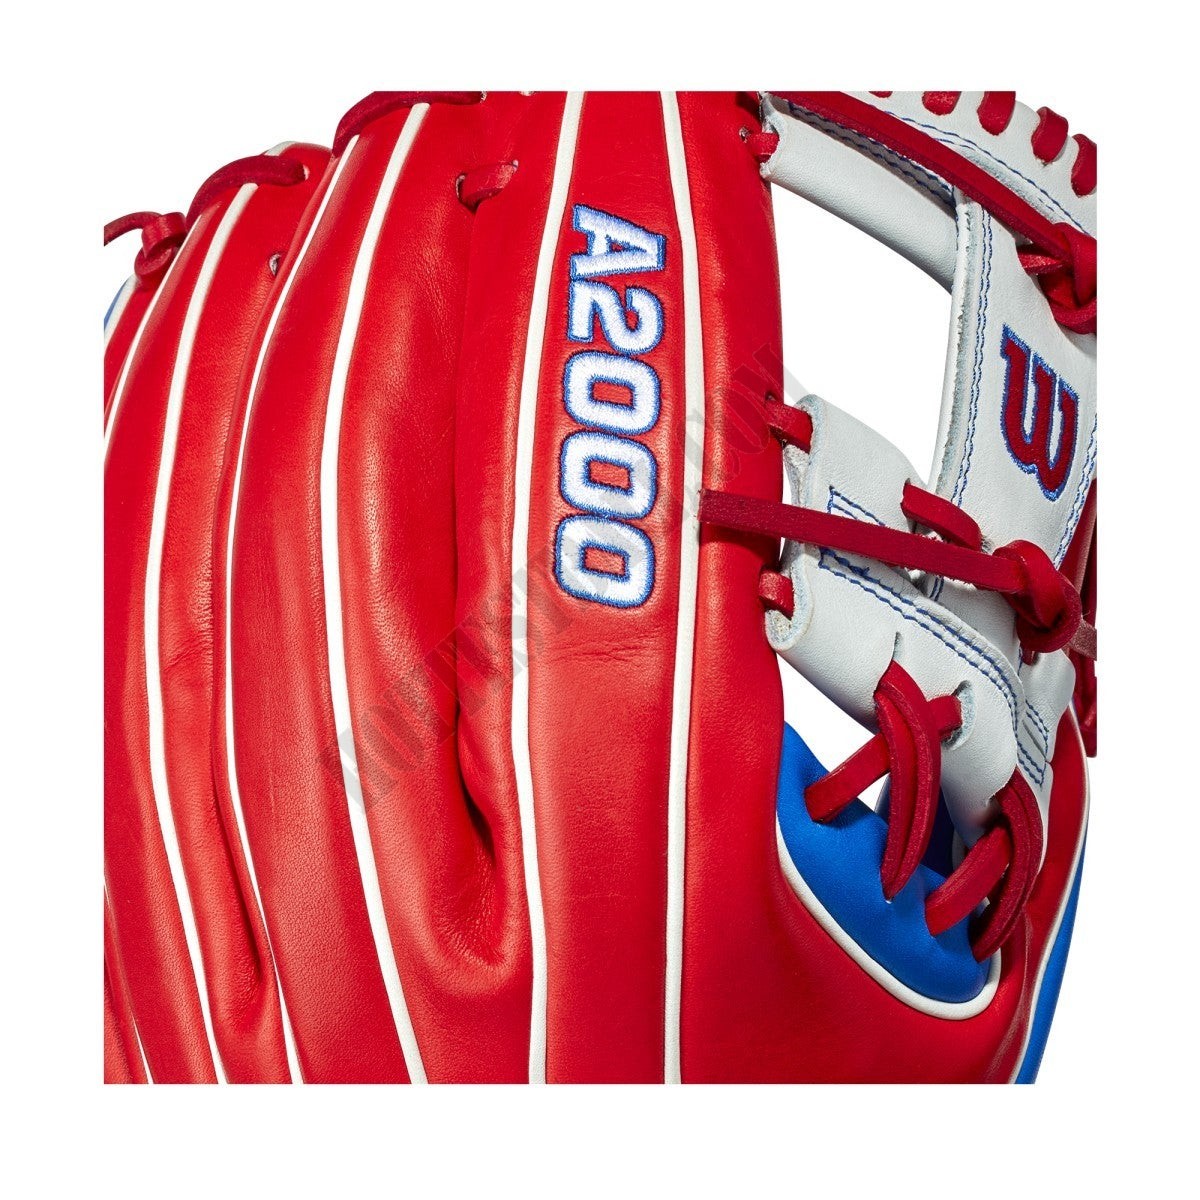 2021 A2000 1786 South Korea 11.5" Infield Baseball Glove - Limited Edition ● Wilson Promotions - -6